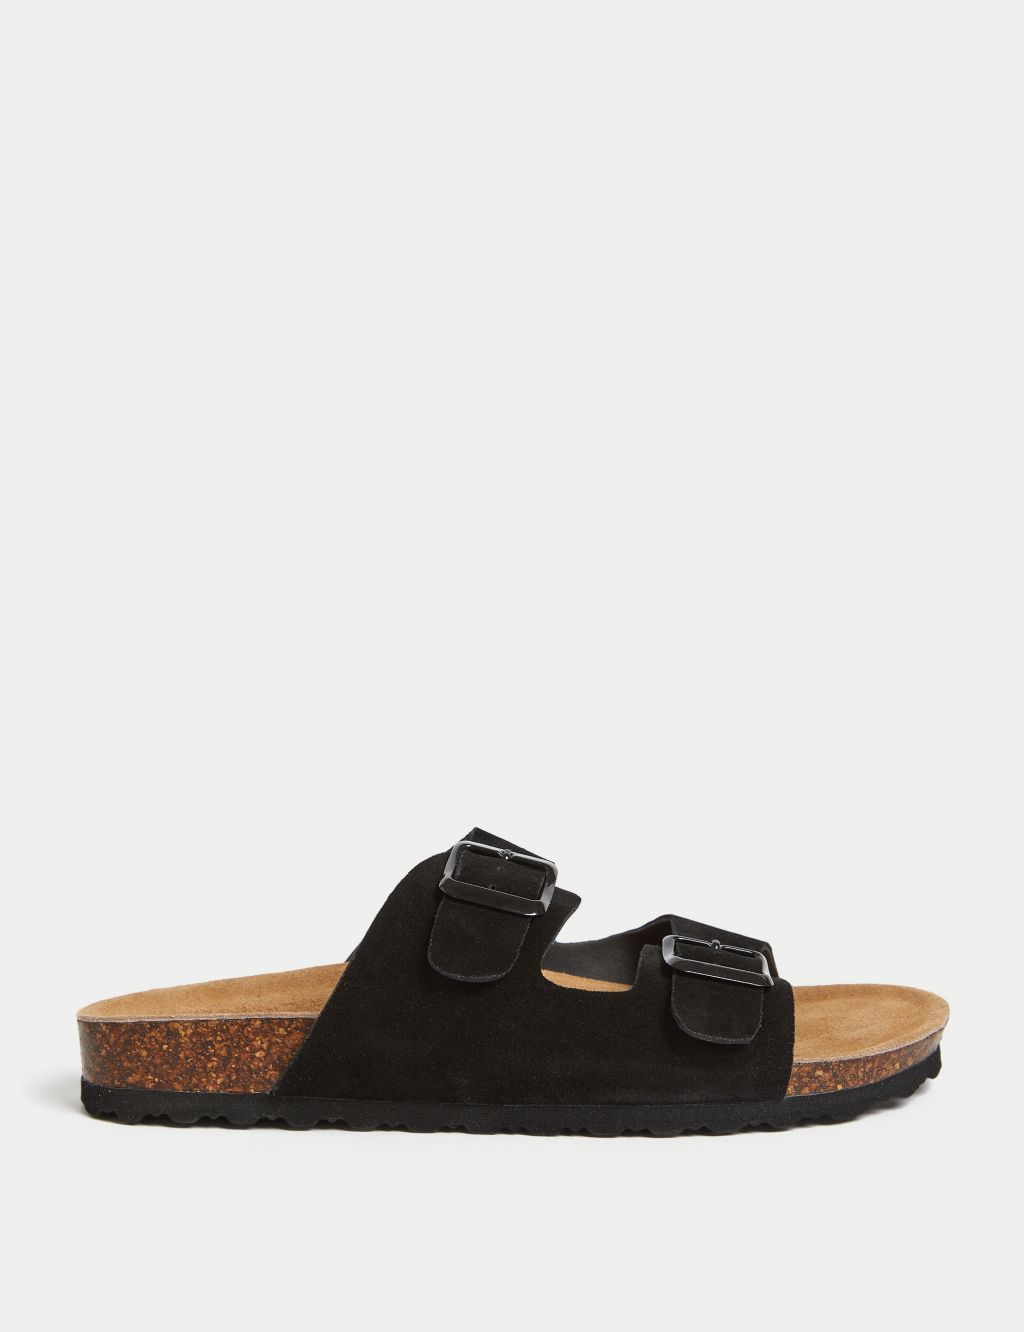 Suede Buckle Footbed Mules image 1